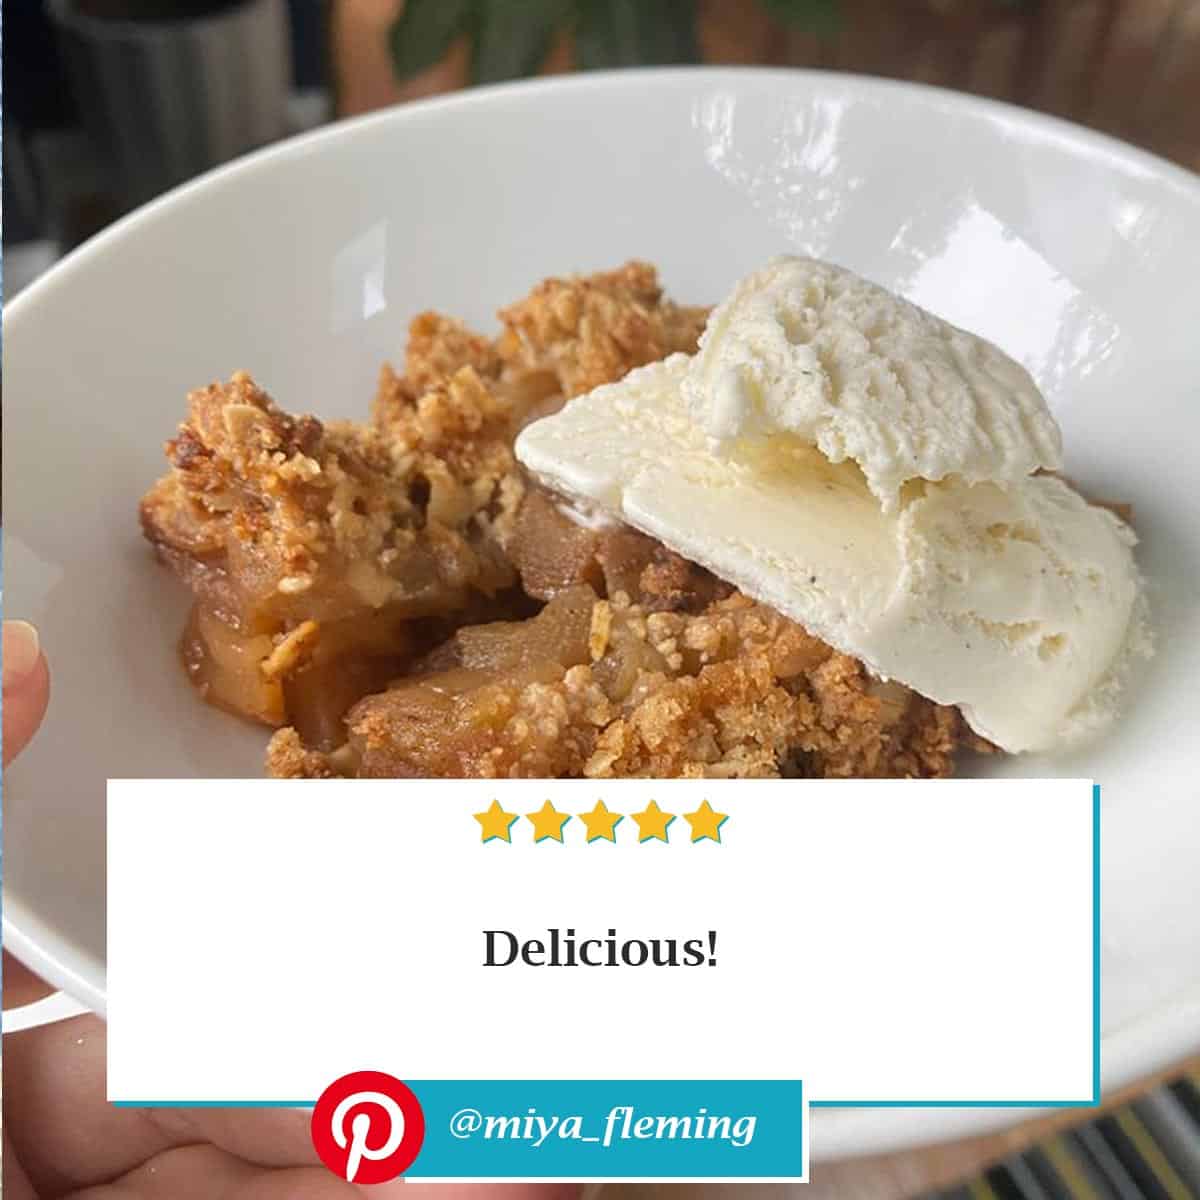 Reviewer photo of Ina Garten Apple Pie in a white dish with the text overlay "Delicious!" and their Pinterest username: @miya_fleming